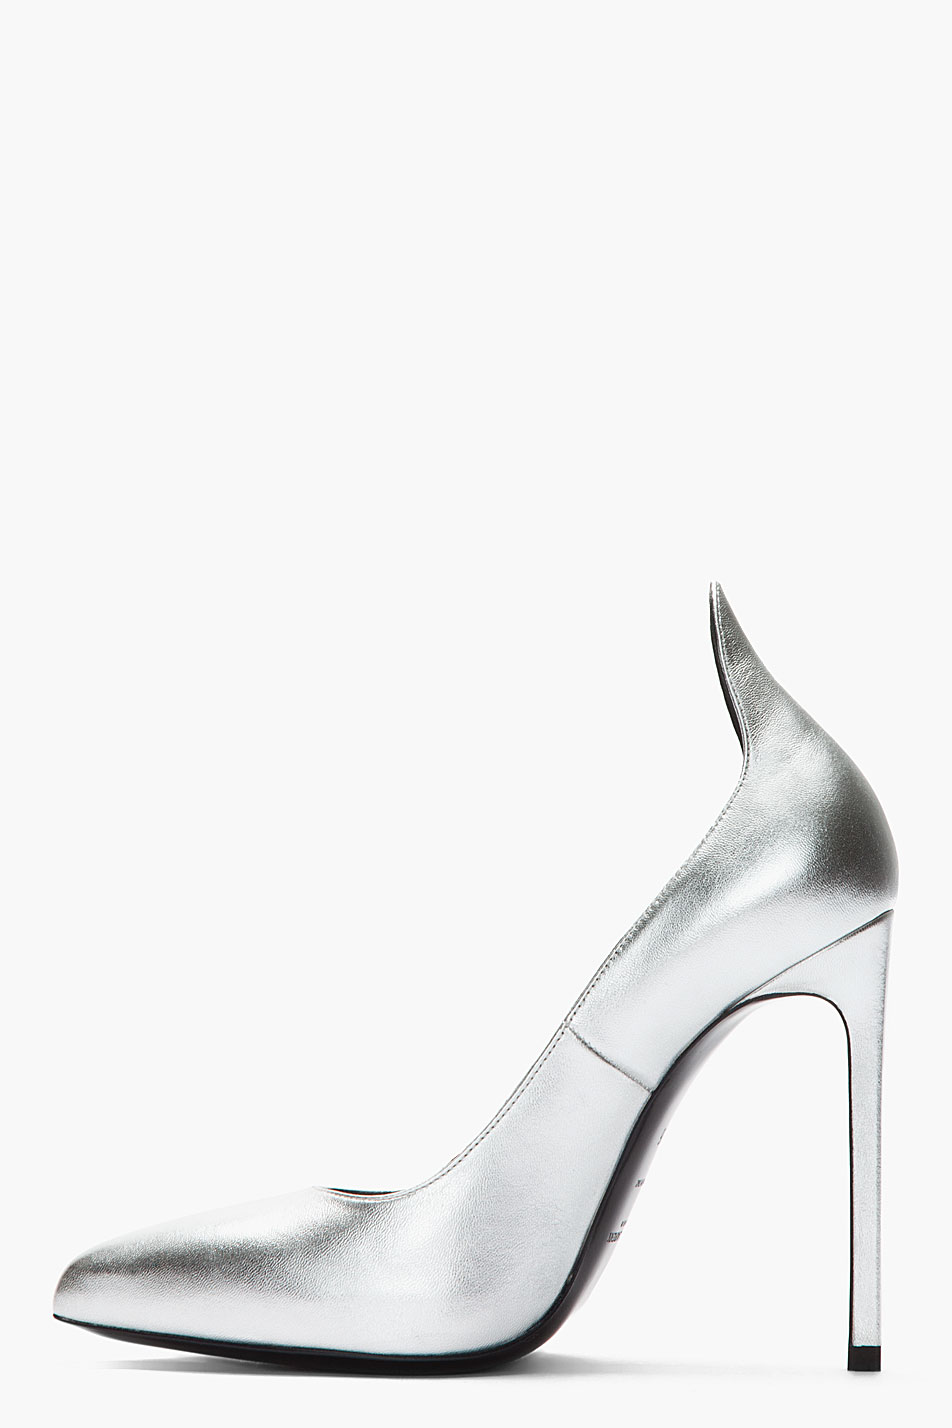 Say It Ain’t So. Silver Is The New Black! | Fashion Junkie